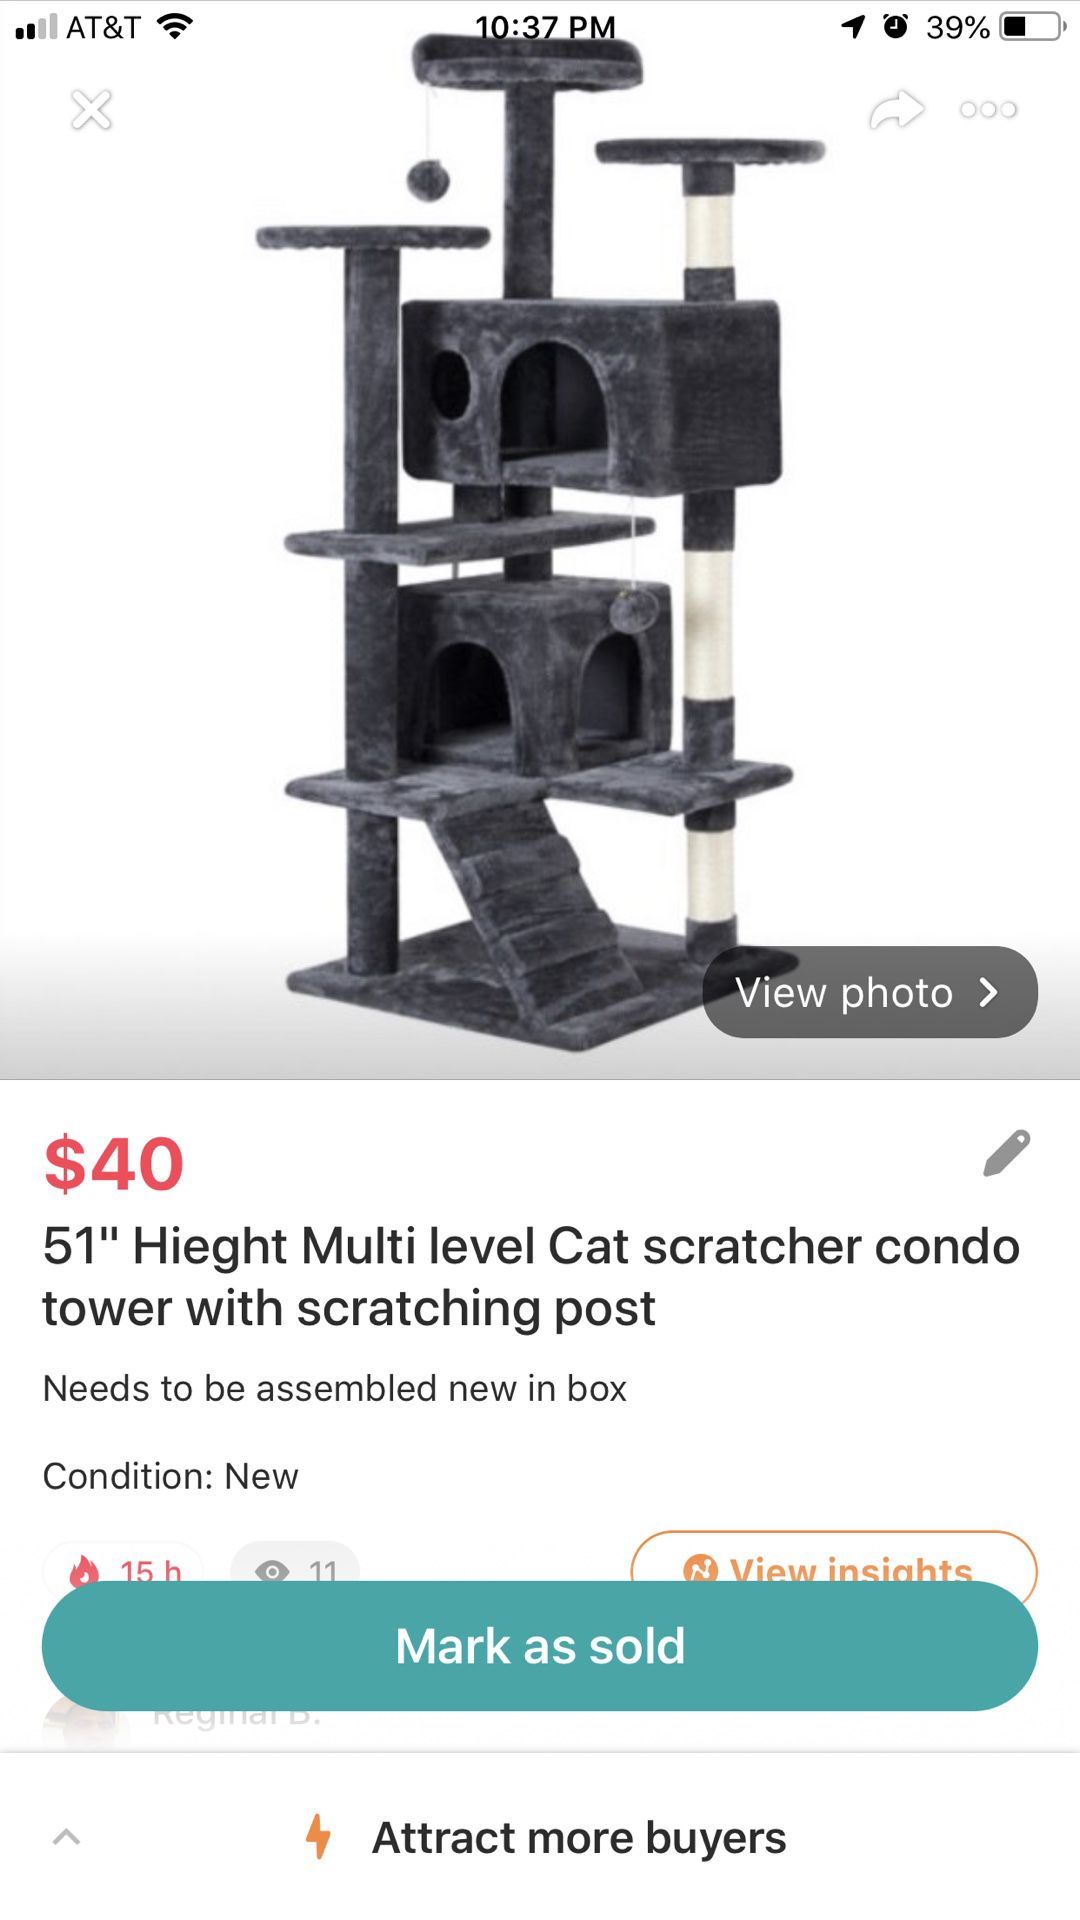 51” height multi level cat scratcher condo tower with scratching post